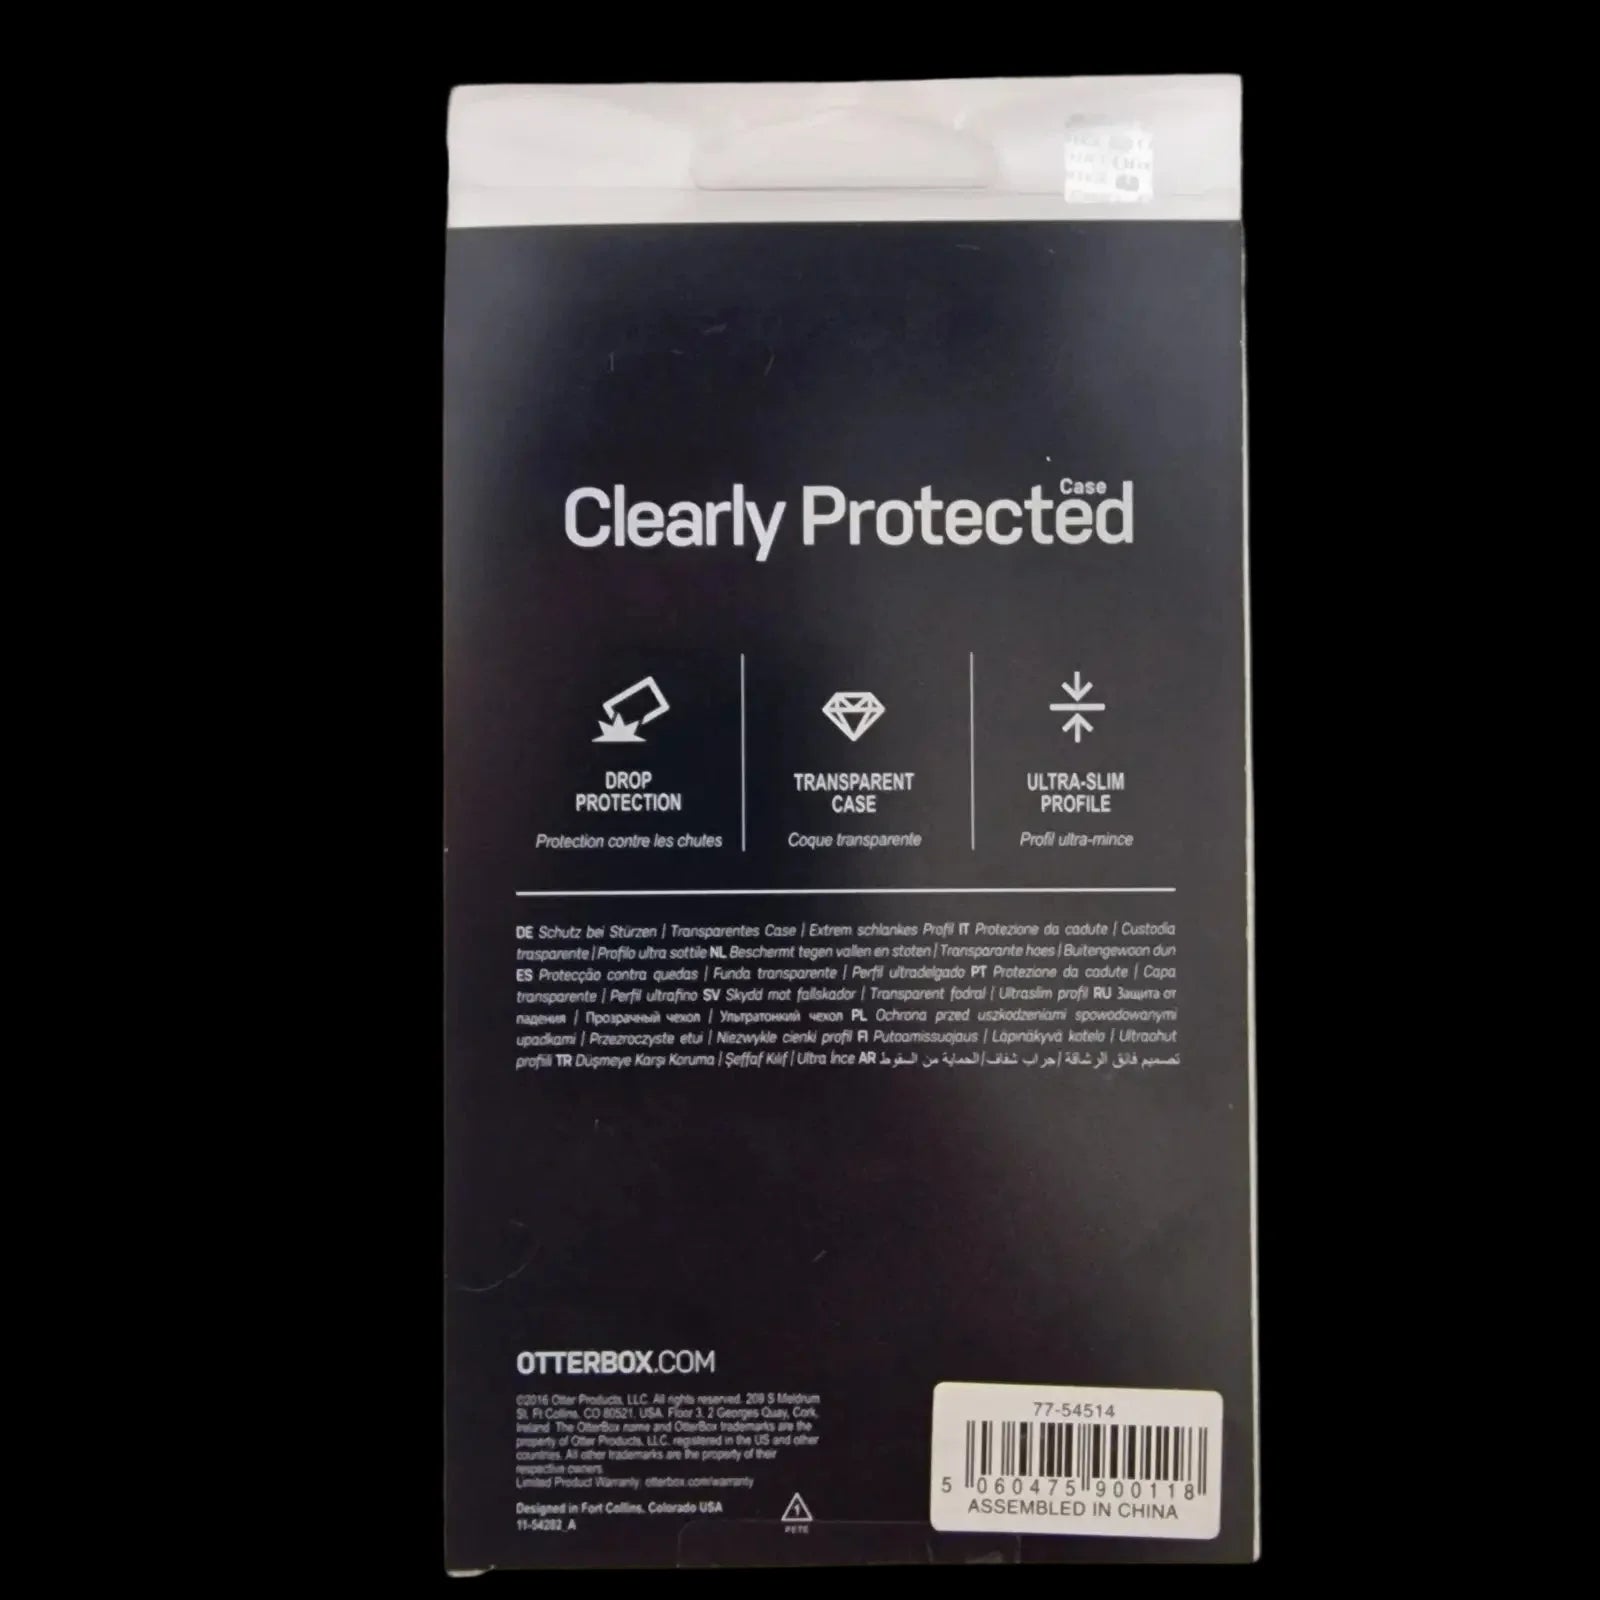 Otterbox Clearly Protected Mobile Phone Case For Huawei P9